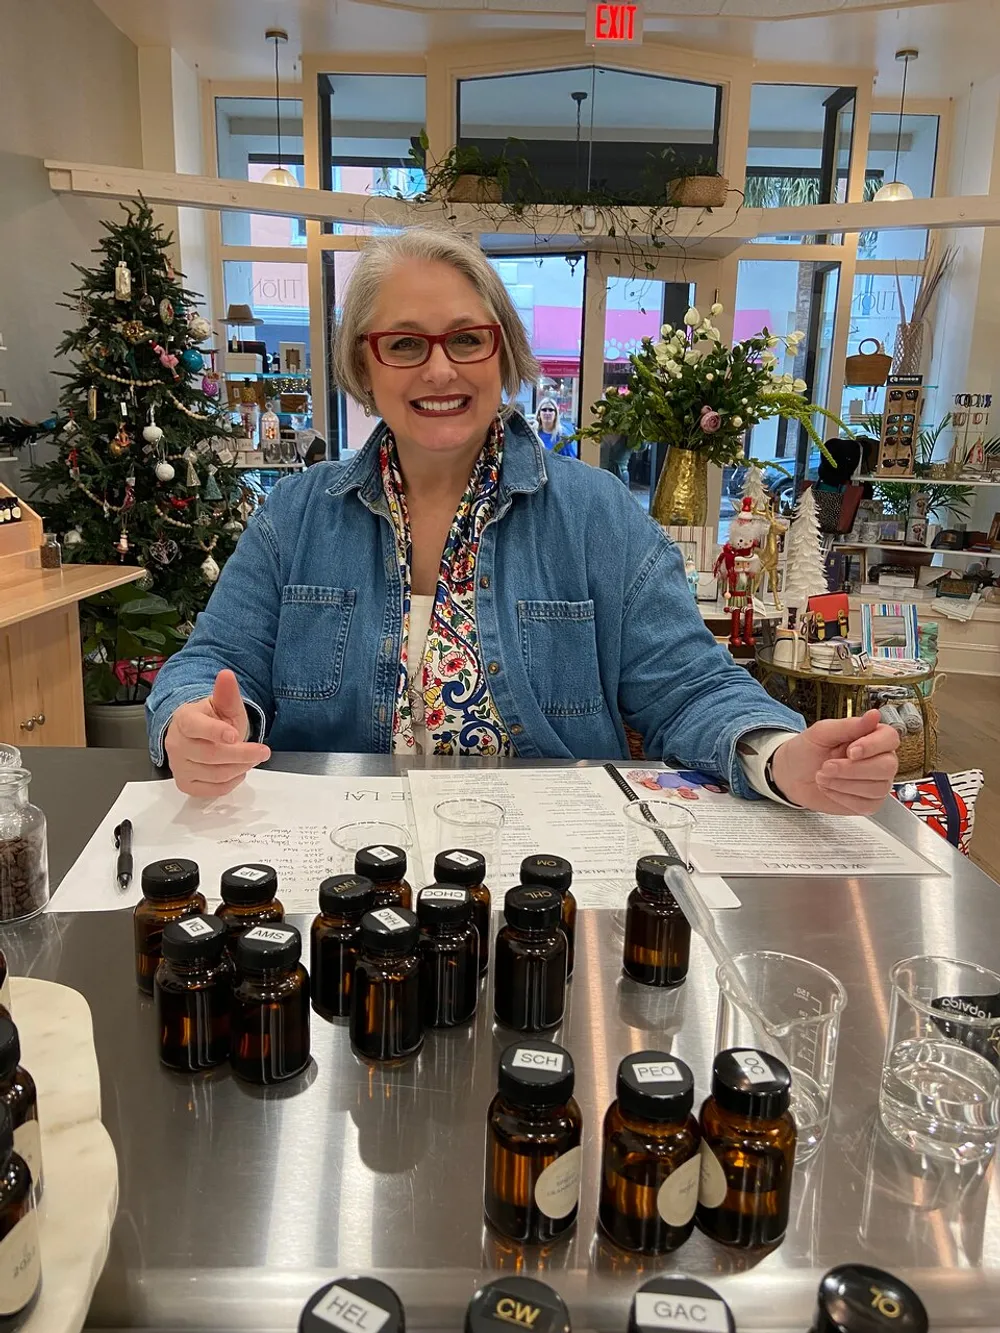 A smiling person is sitting behind a table with an array of small labeled bottles likely in a shop or boutique with a festive atmosphere